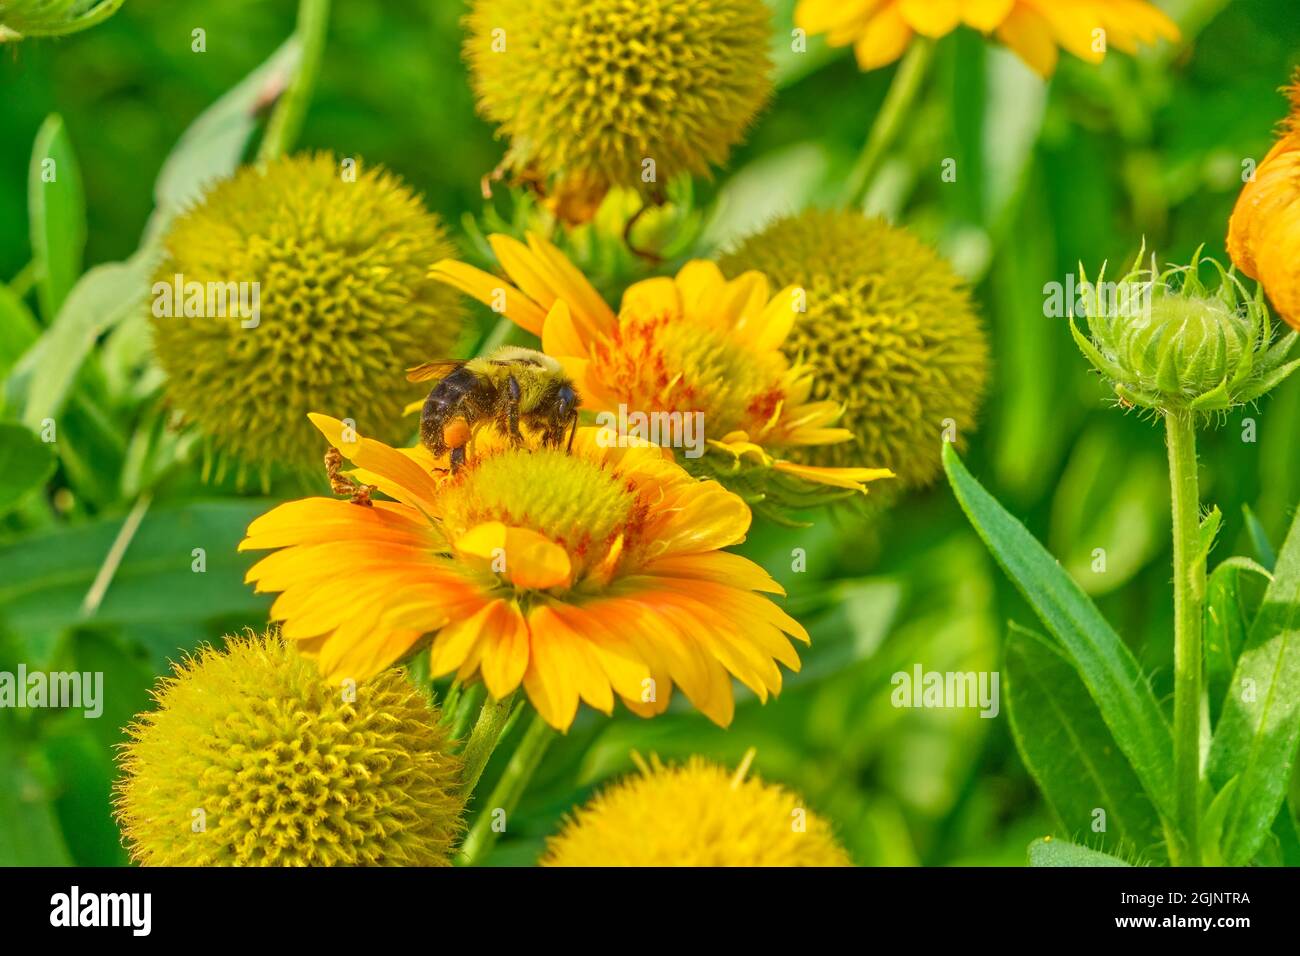 Common Eastern Bumblebee gathers pollen from a patch of Indian Blanket flowers. Stock Photo